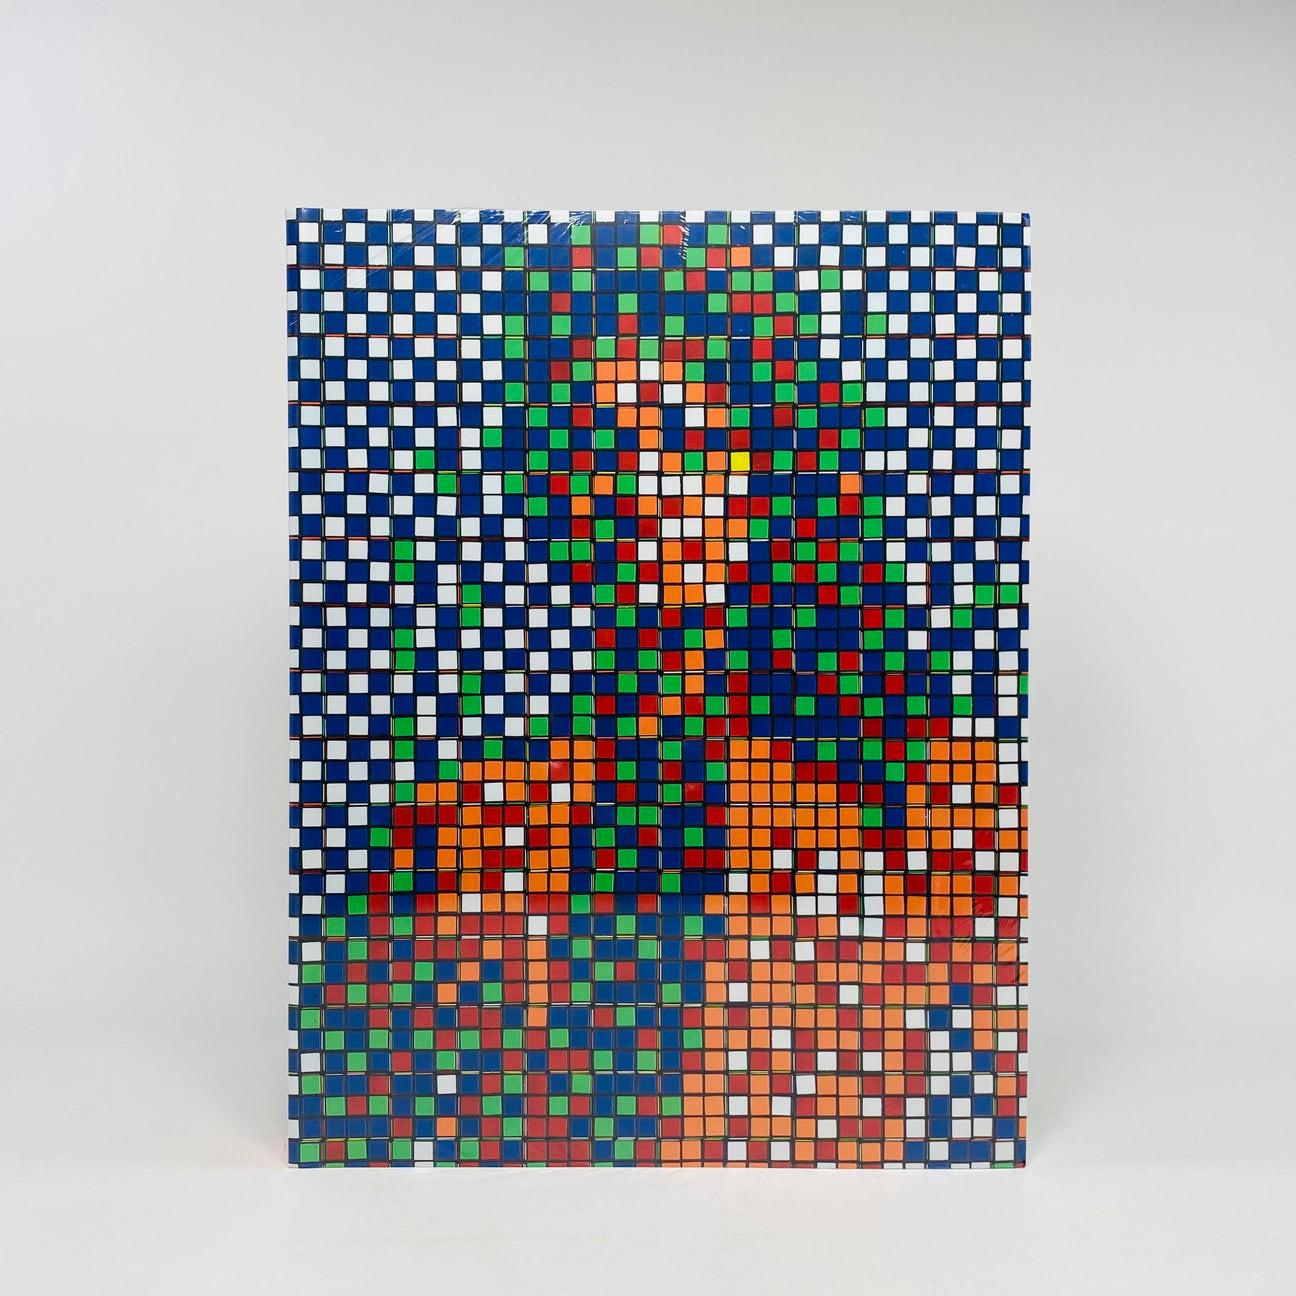 Invader, Rubikcubist Invader, 2022

Must have for the Invader fan, Invader Rubikcubist.
Covers Invaders start with the Rubik sculptures and artworks from the beginning in 2004 to 2022.
Features more than 500 incredible images of Invader artworks,